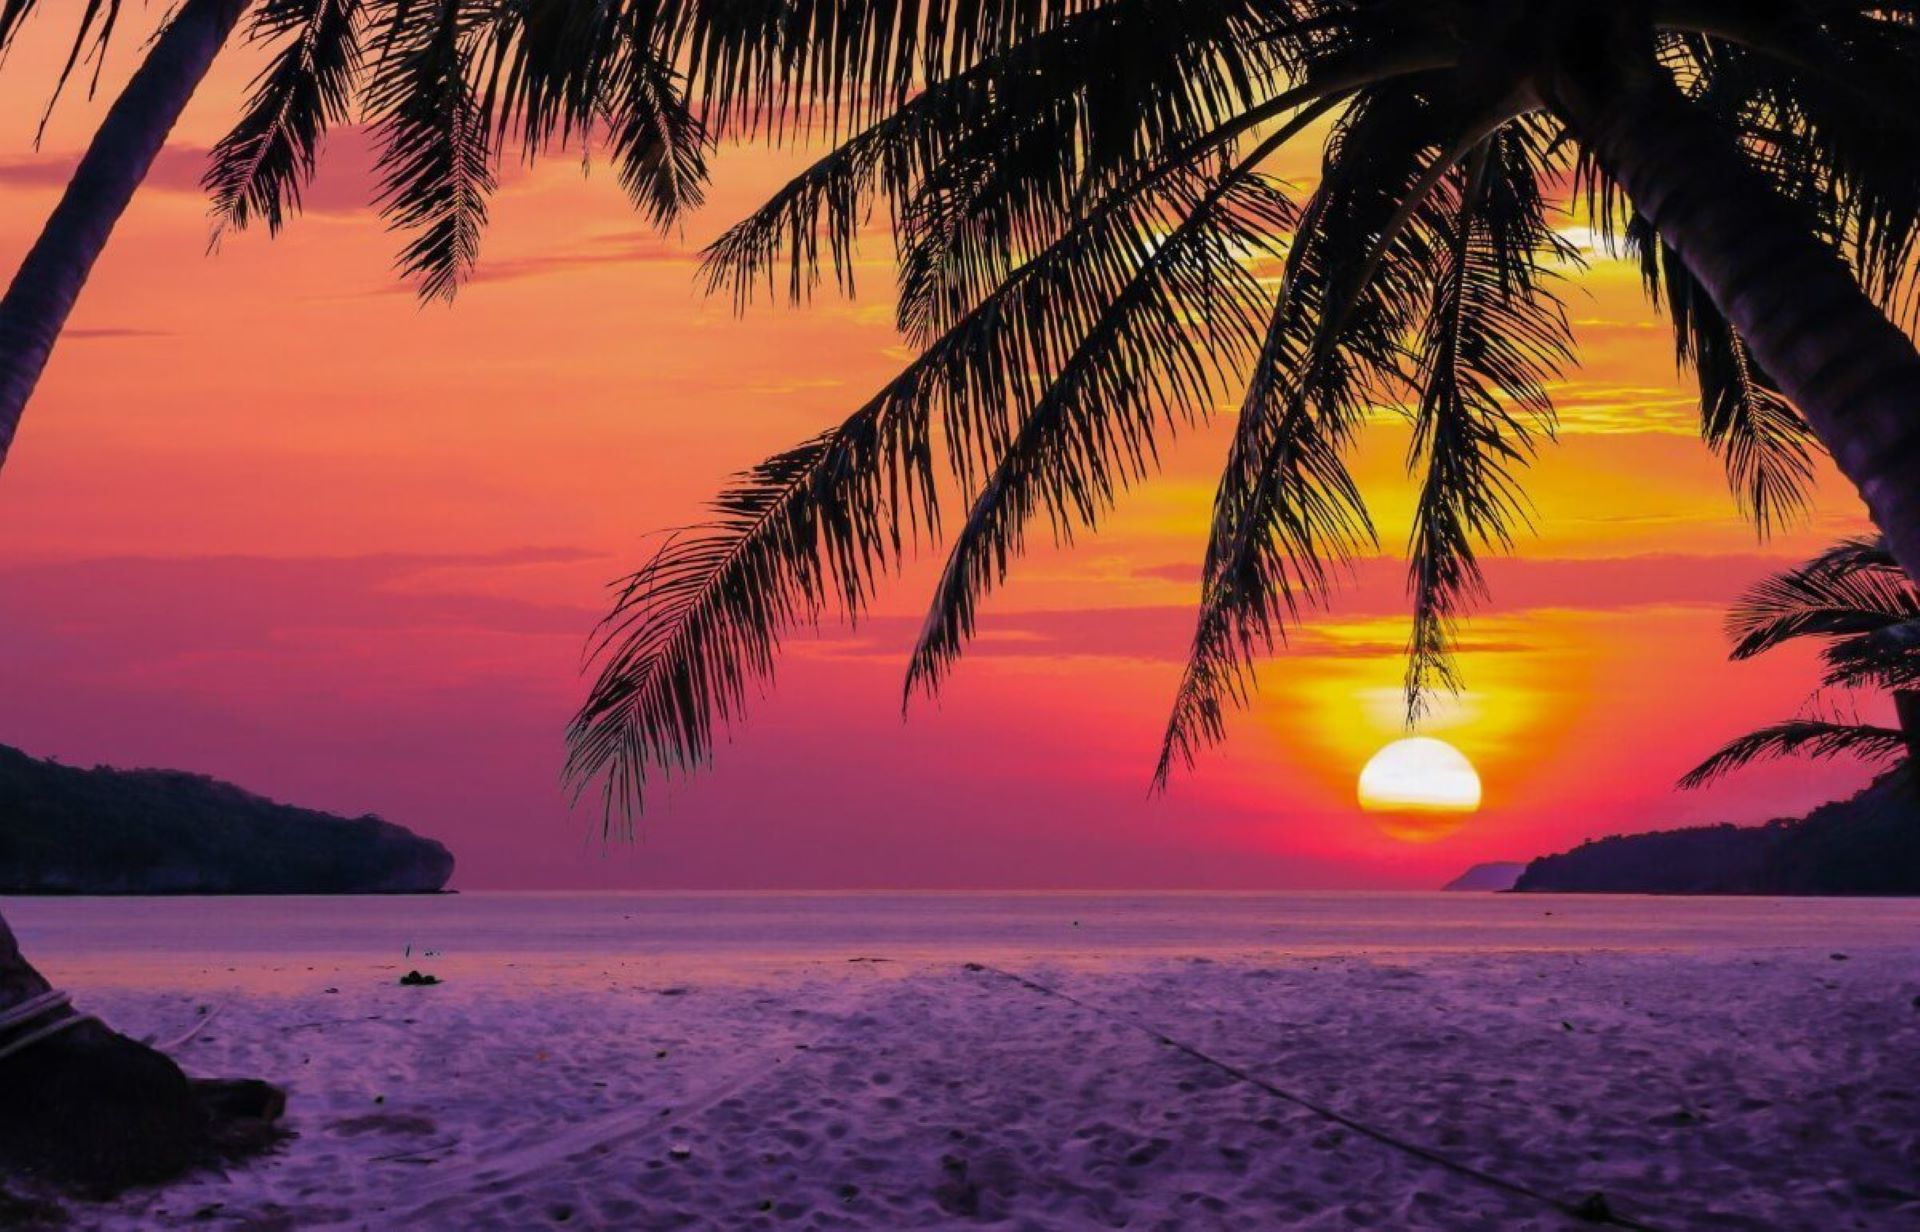 Sunset in the tropics